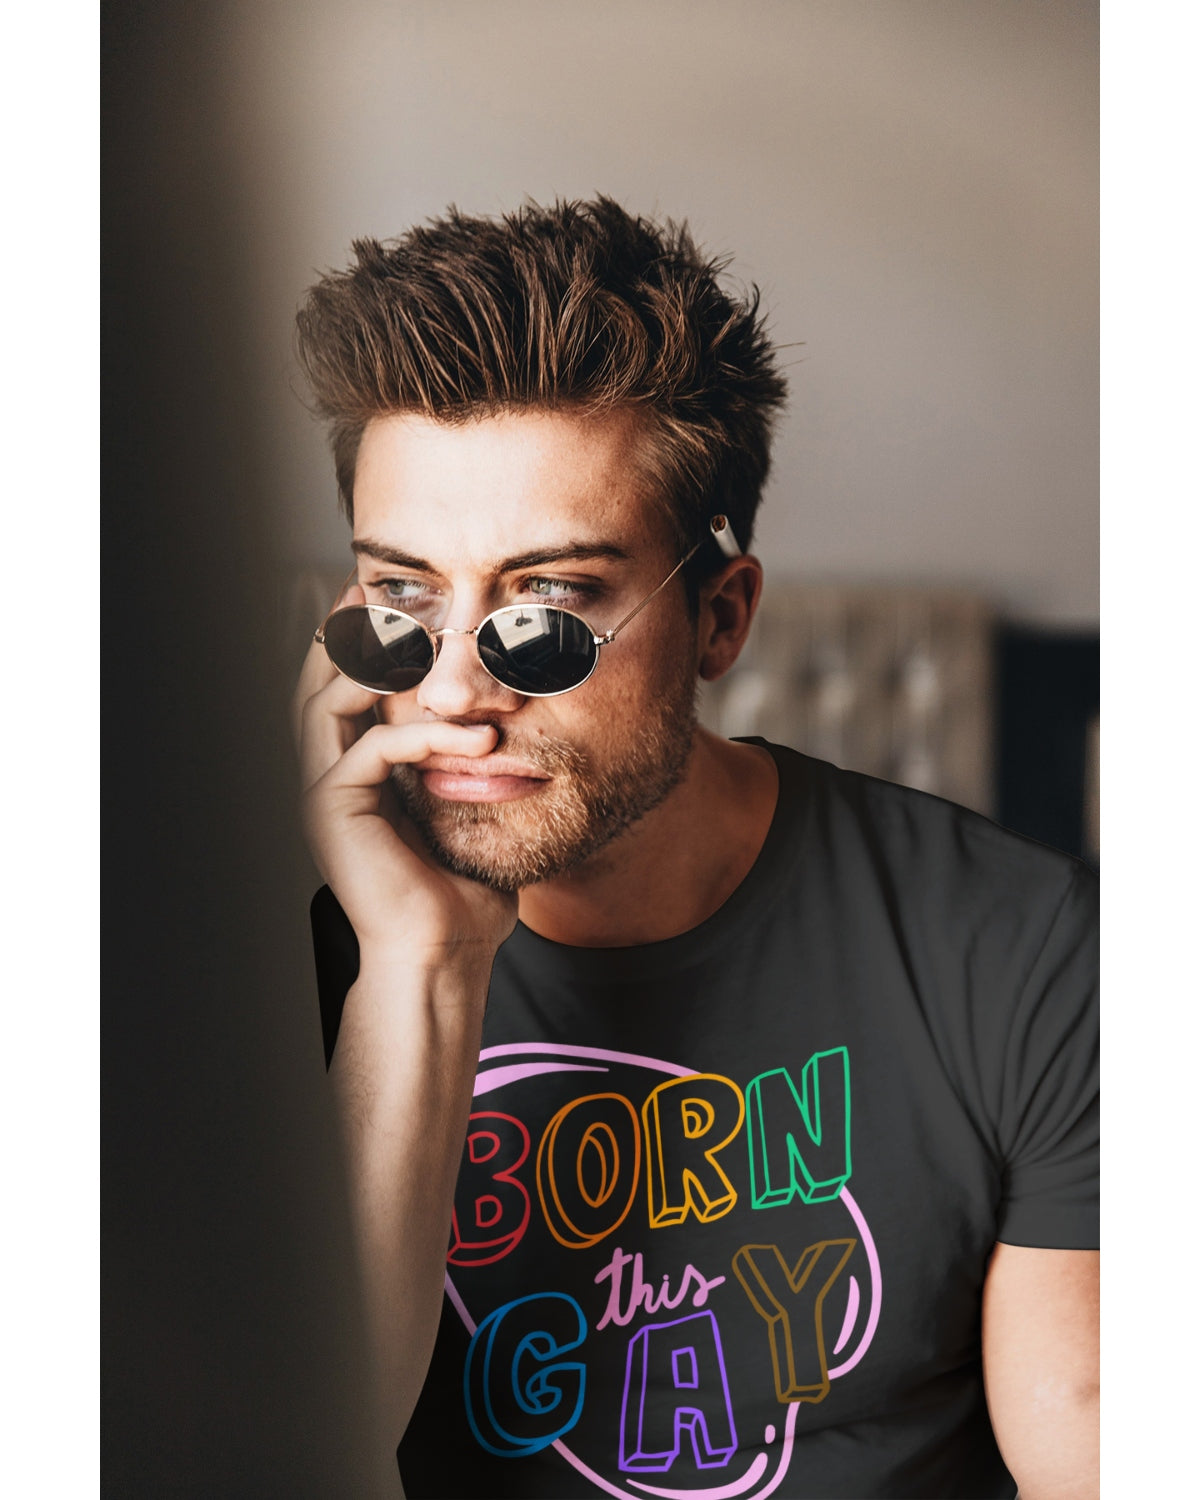 A man wearing pride sunglasses and a Born This Gay T-shirt.